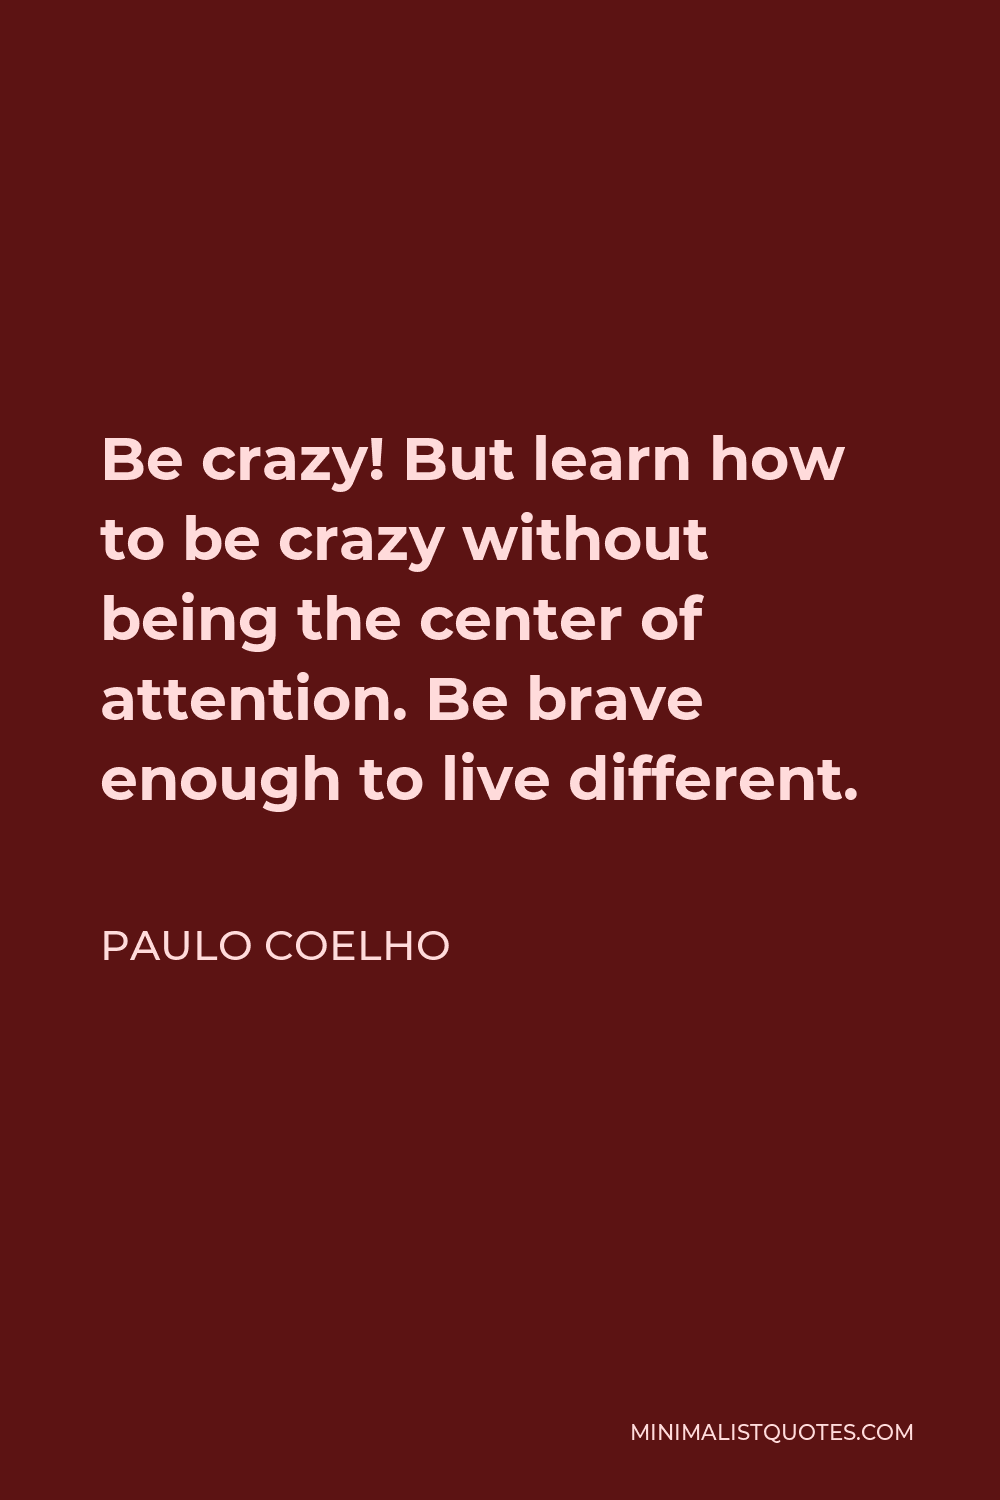 Paulo Coelho Quote - Be crazy! But learn how to be crazy without being the center of attention. Be brave enough to live different.